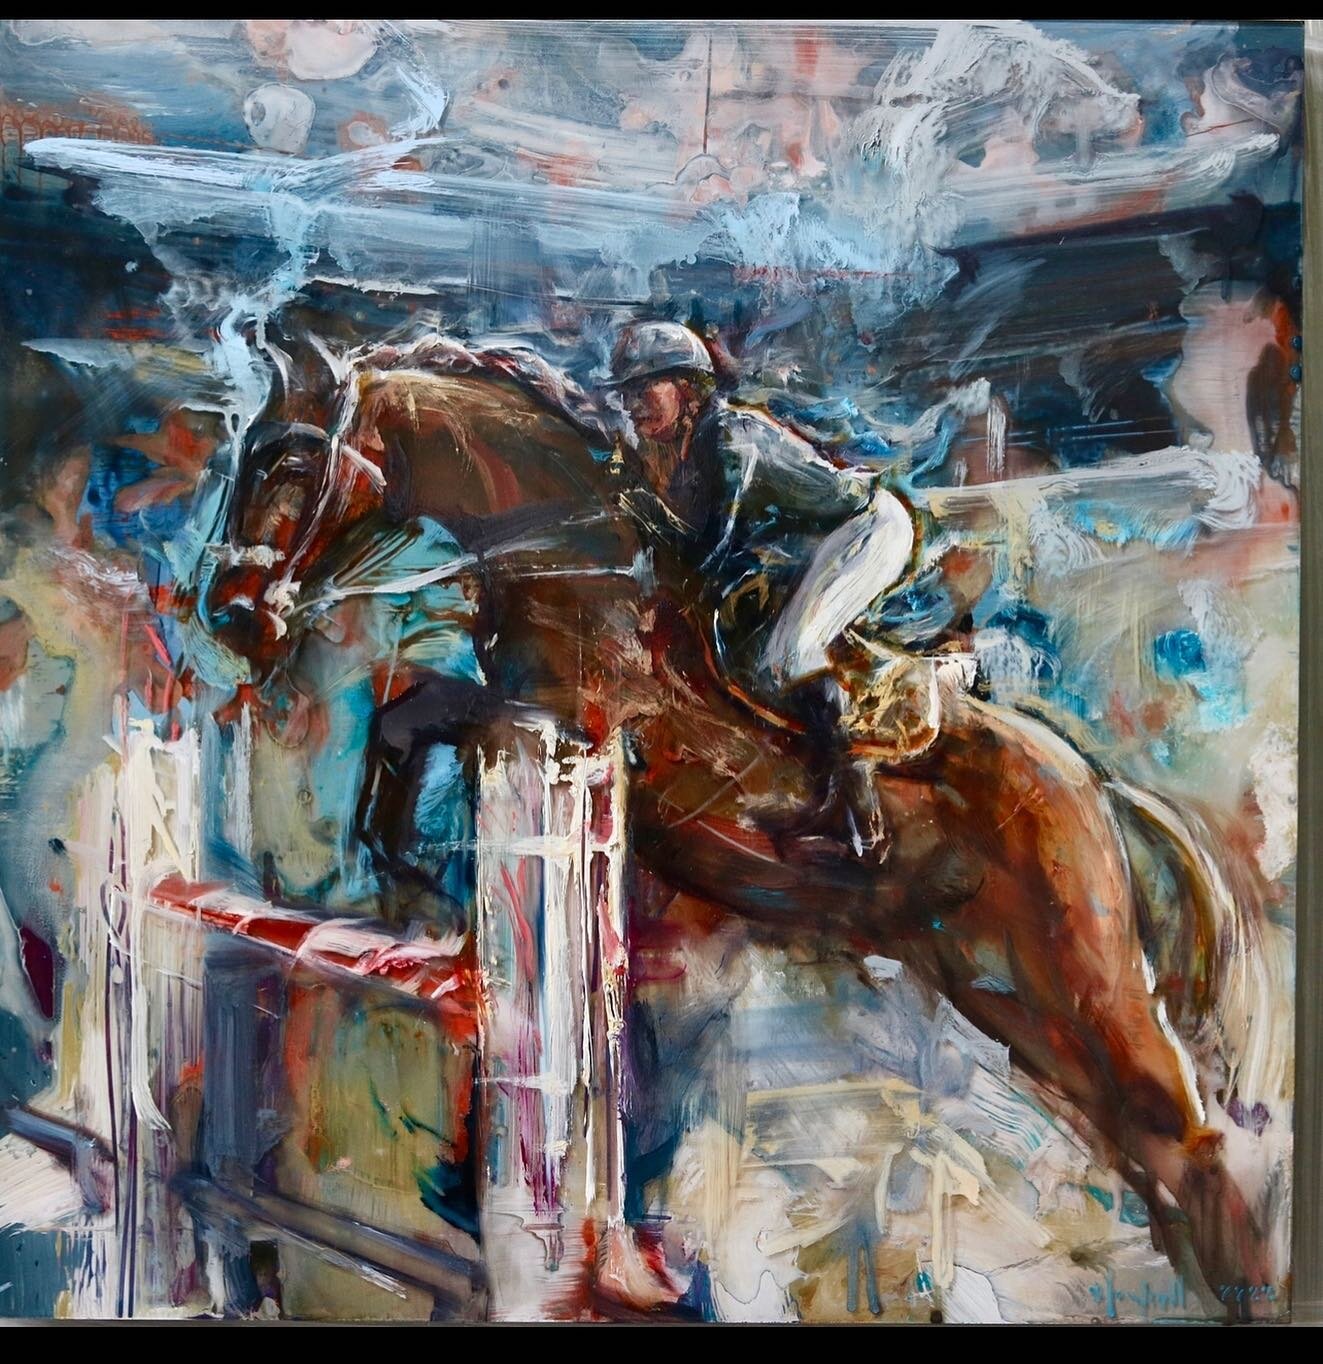 &ldquo;Leap of Faith&rdquo;, Jessica Springsteen, acrylic and oil, 24 x 24. Her father has some moves but this young lady can fly.&mdash;&mdash;&mdash;&mdash;&mdash;&mdash;&mdash;&mdash;&mdash;&mdash;&mdash;&mdash;&mdash;&mdash;- #HorseJumping, #Eque